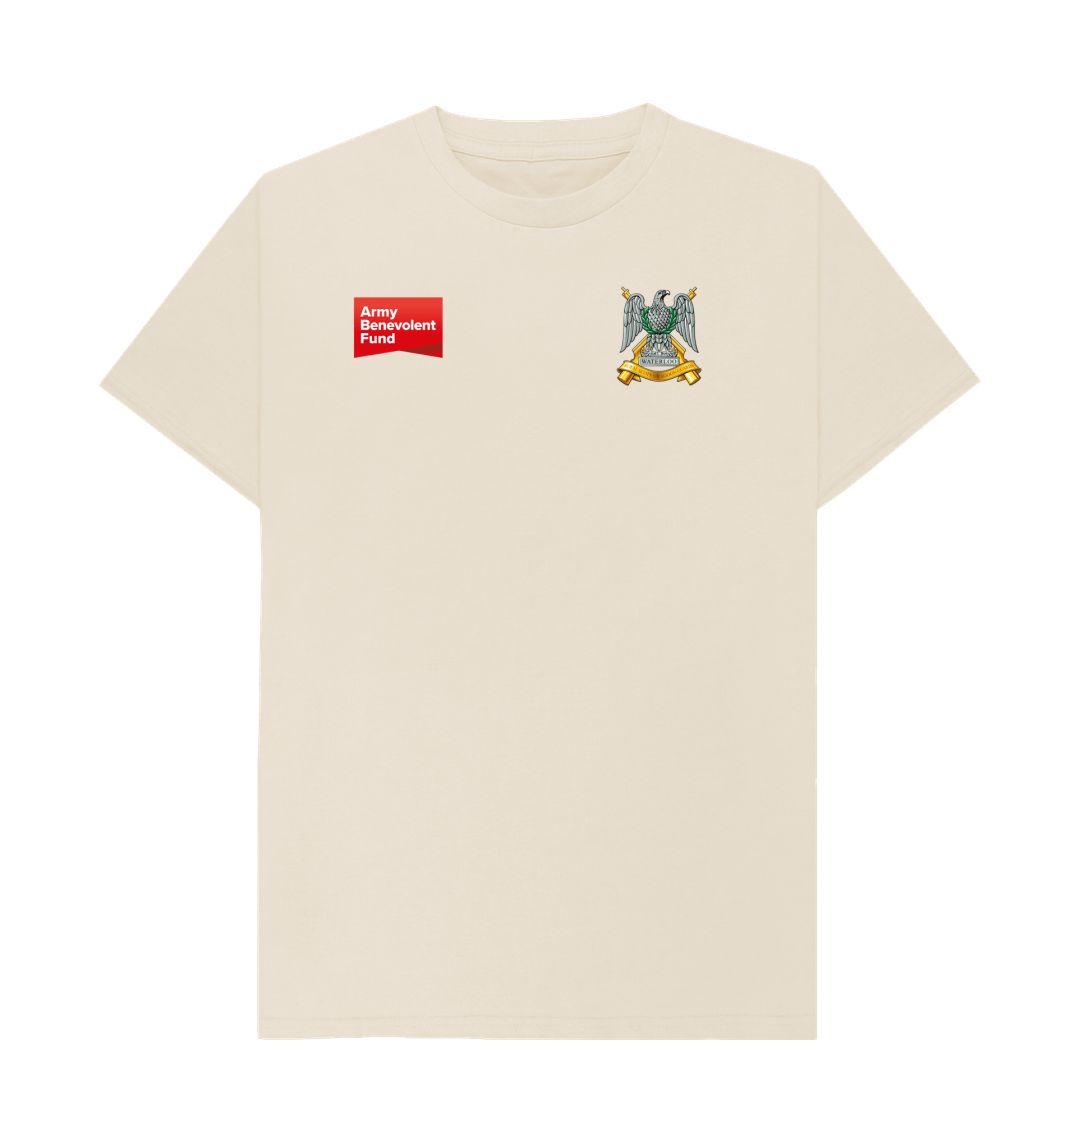 The Royal Scots Dragoon Guards Unisex T-shirt - Army Benevolent Fund